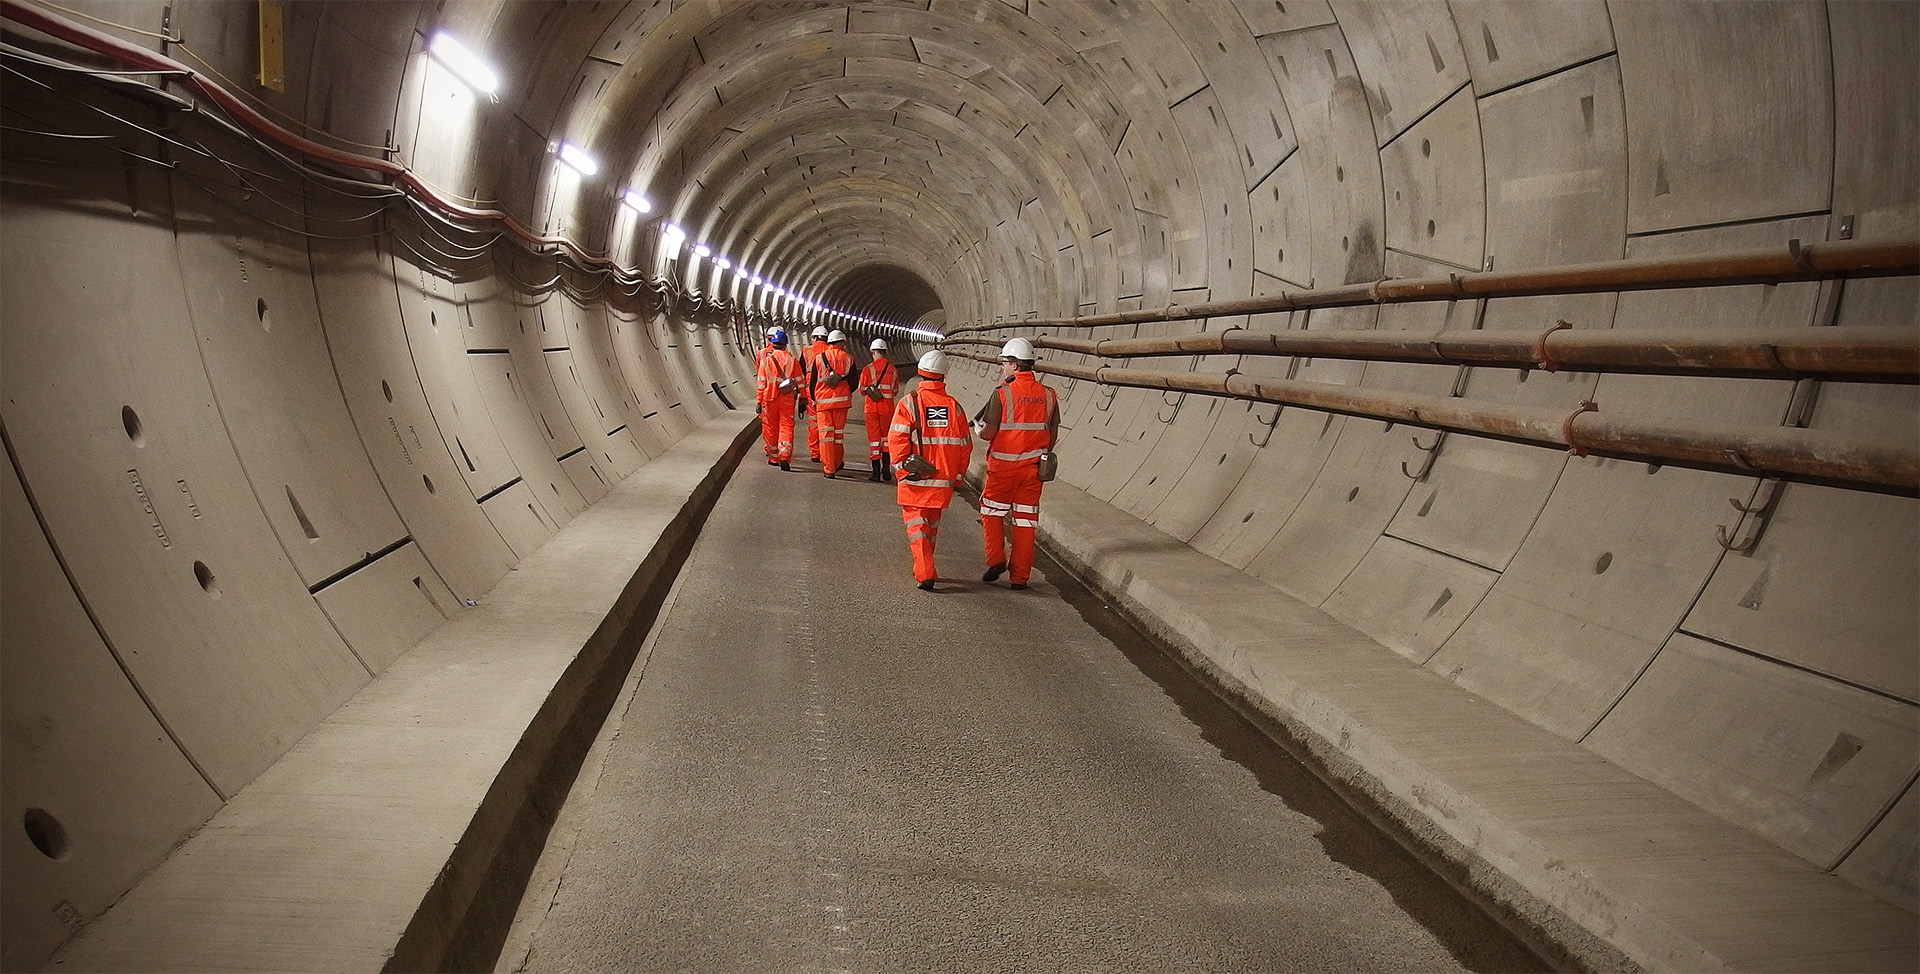 People in orange clothing walk through a tunnel>
		</div>

		<div class=